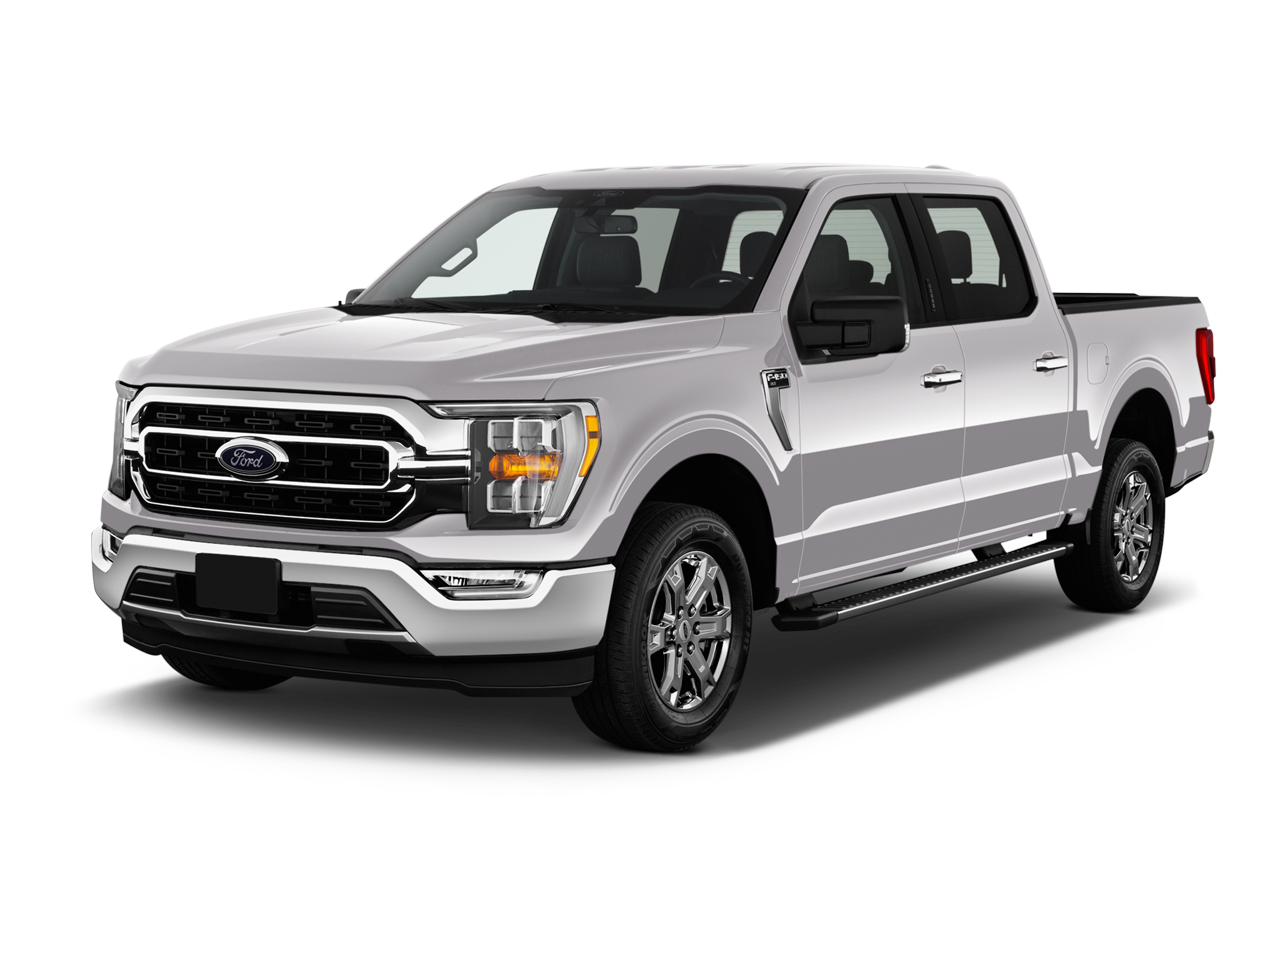 Used 2021 Ford F150 Platinum near Southaven, MS Landers